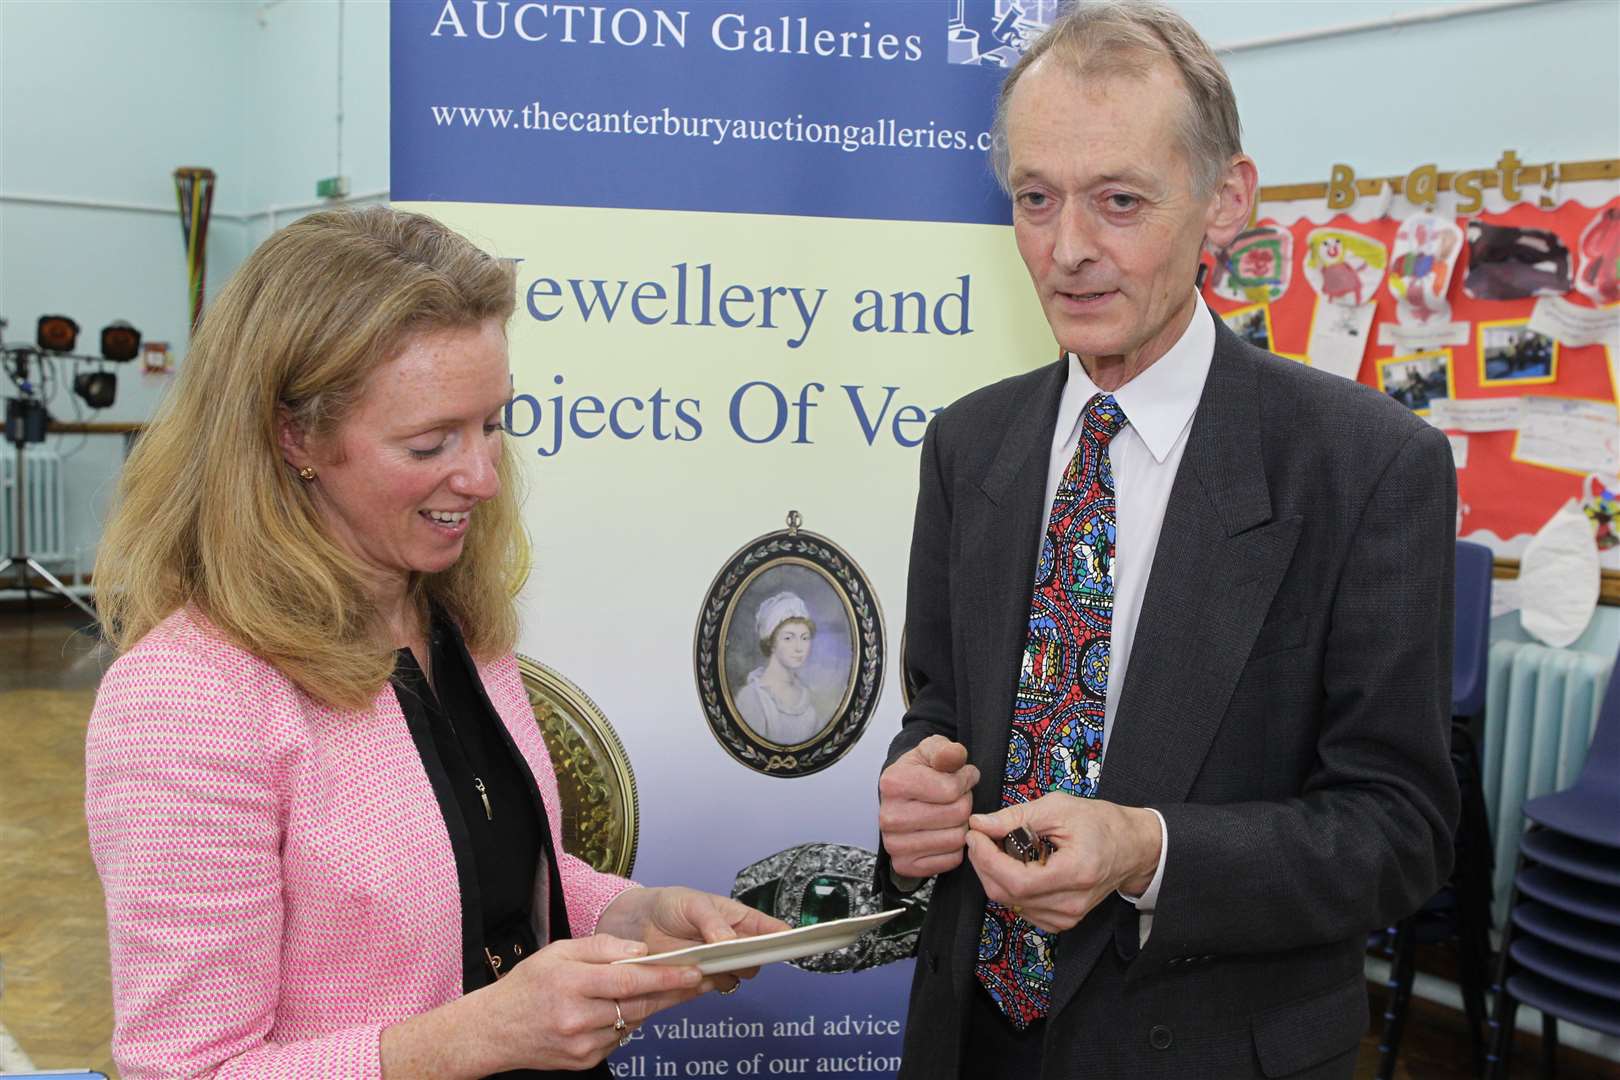 Auctioneer Cliona Kilroy and Justin Ball, who is a valuer and cataloguer, helped people value items they brought in